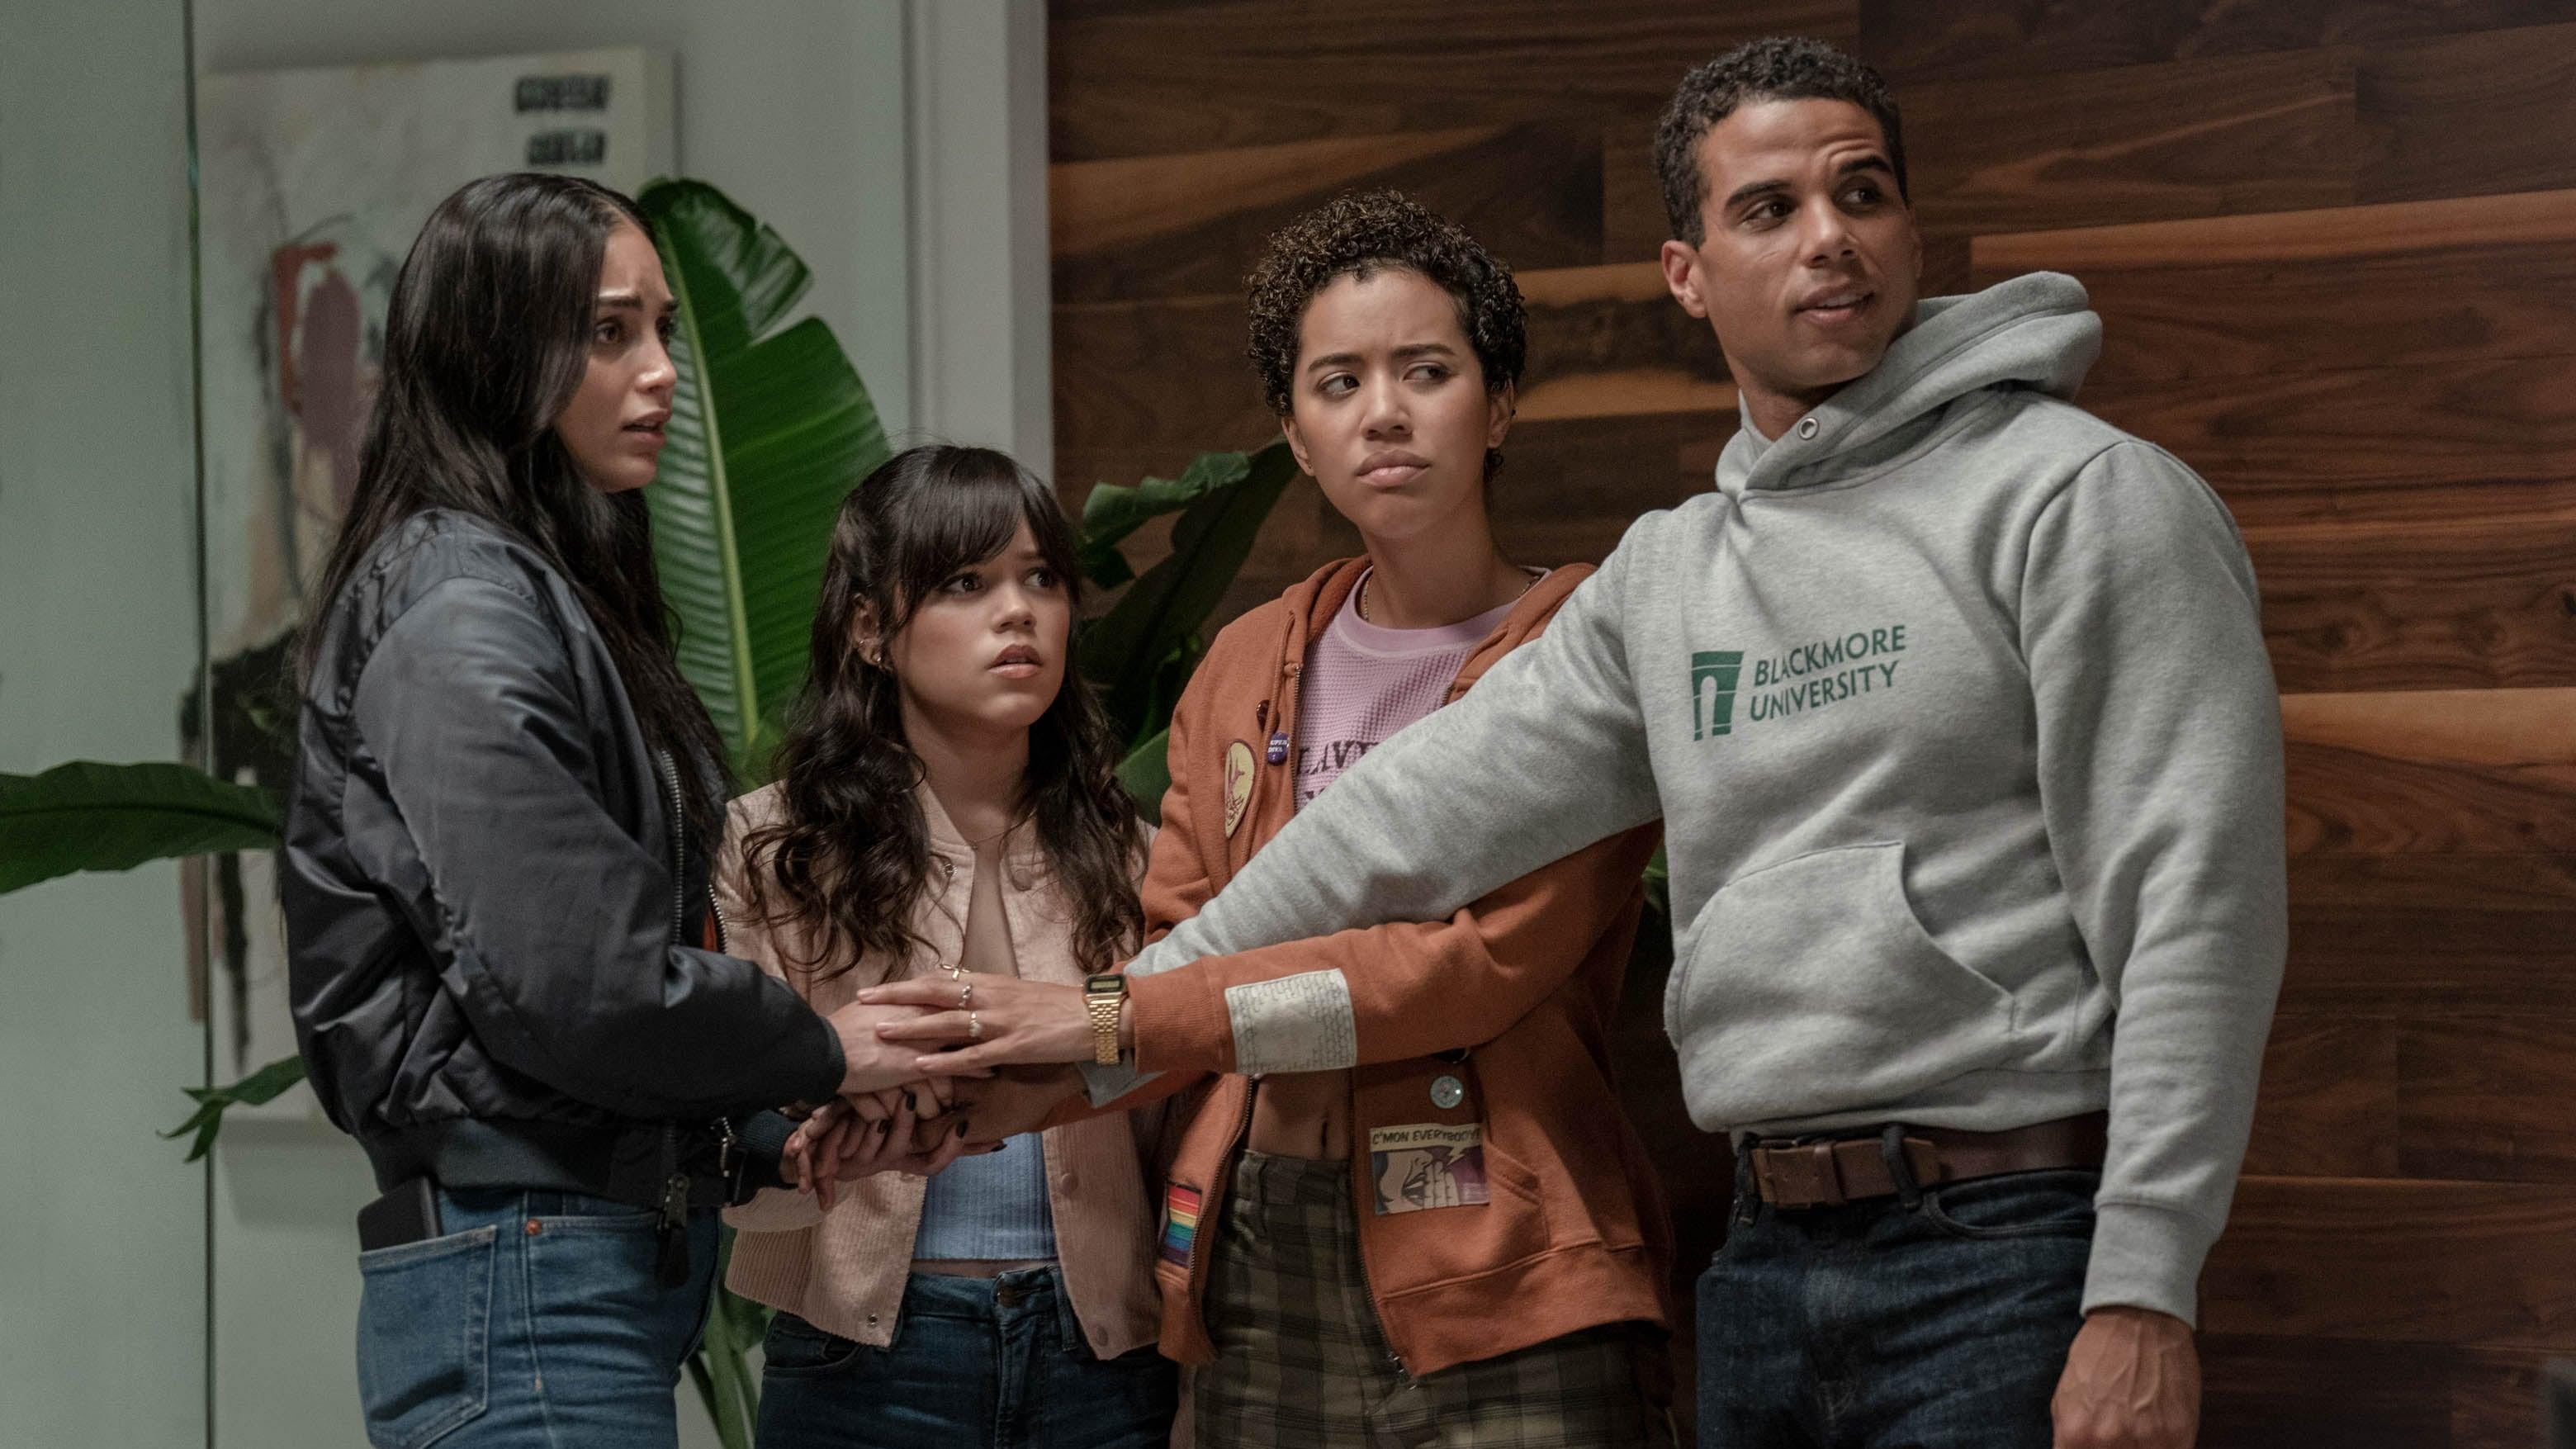 The four surviving characters from Scream V are back, played by Melissa Barrera, Jenna Ortega, Jasmin Savoy Brown, and Mason Gooding. (Image: Paramount)